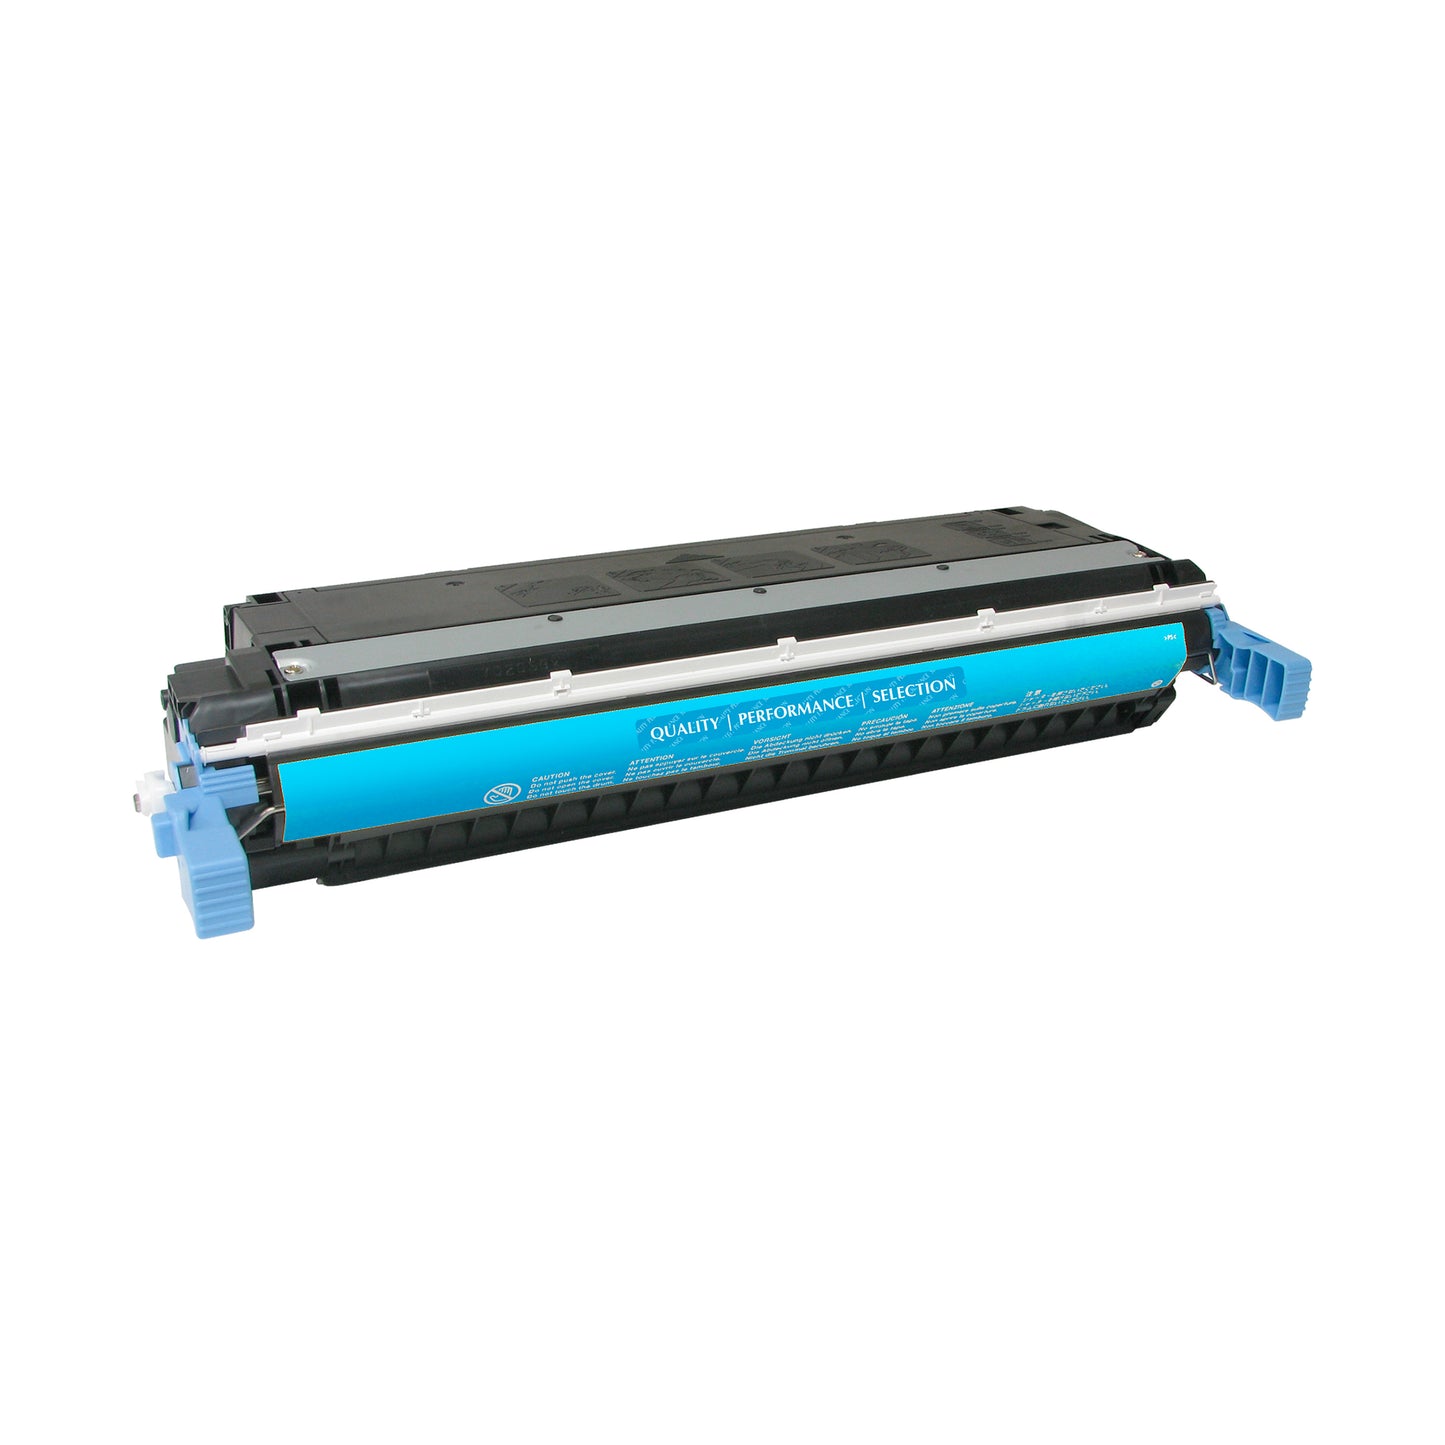 HP 645A (C9731A) Cyan Remanufactured Toner Cartridge [12,000 pages]